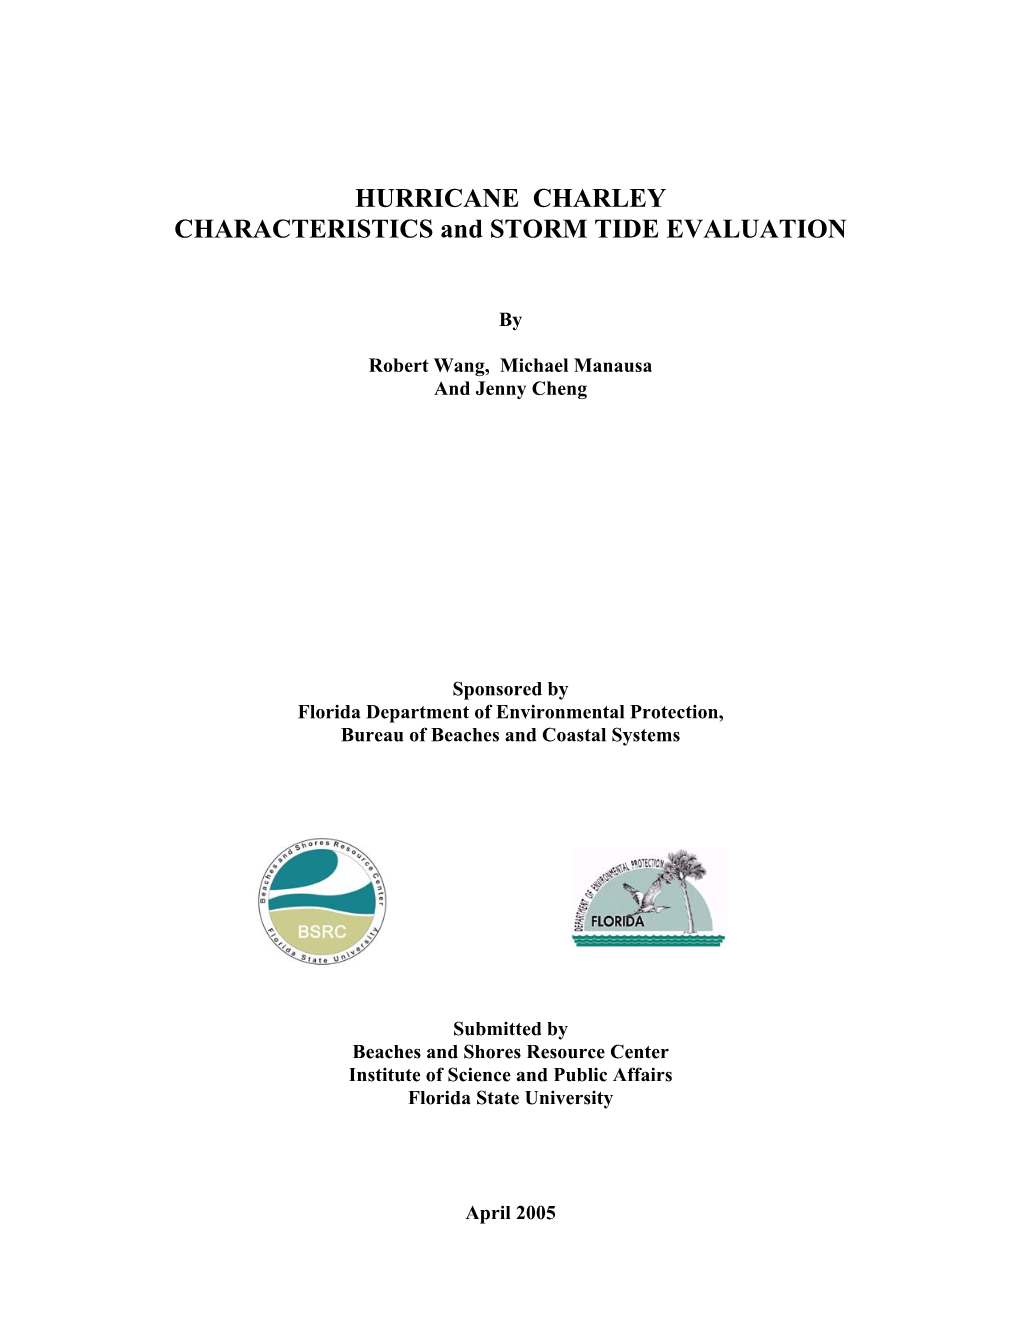 HURRICANE CHARLEY CHARACTERISTICS and STORM TIDE EVALUATION